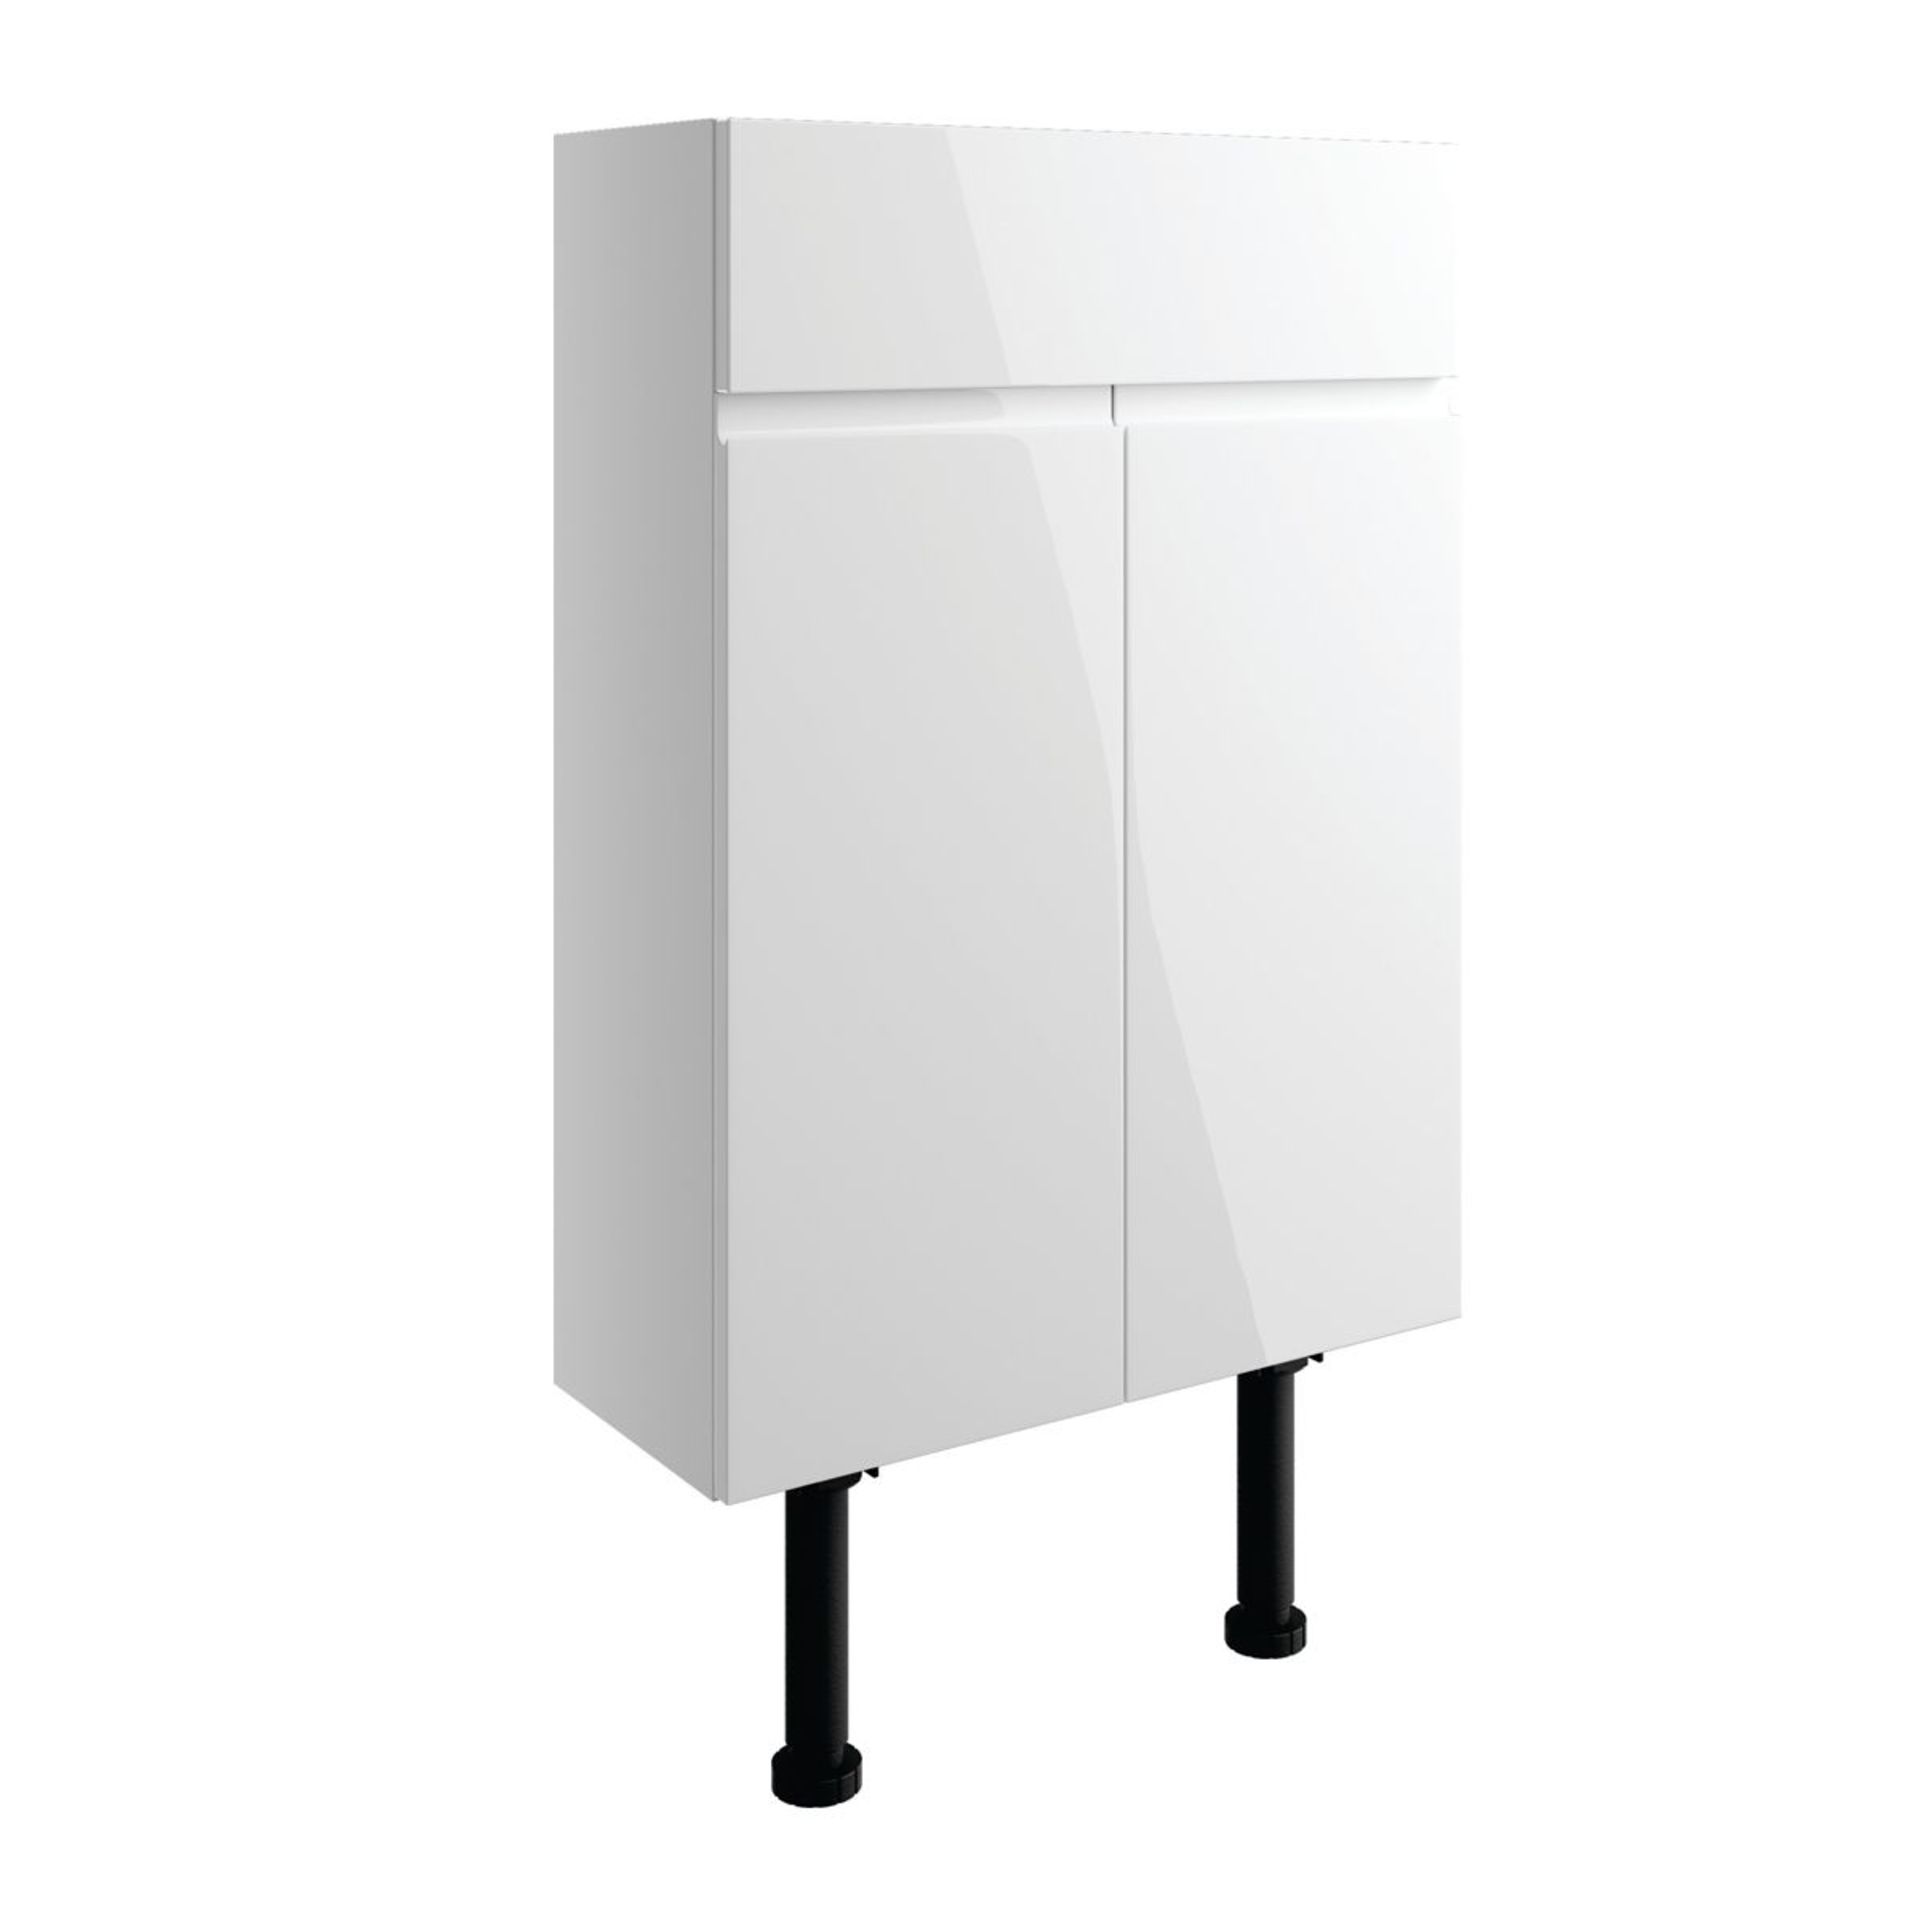 New (T155) Valesso White Gloss Vanity Unit 600mm. RRP £305.99. Finished In White Gloss Adjust...